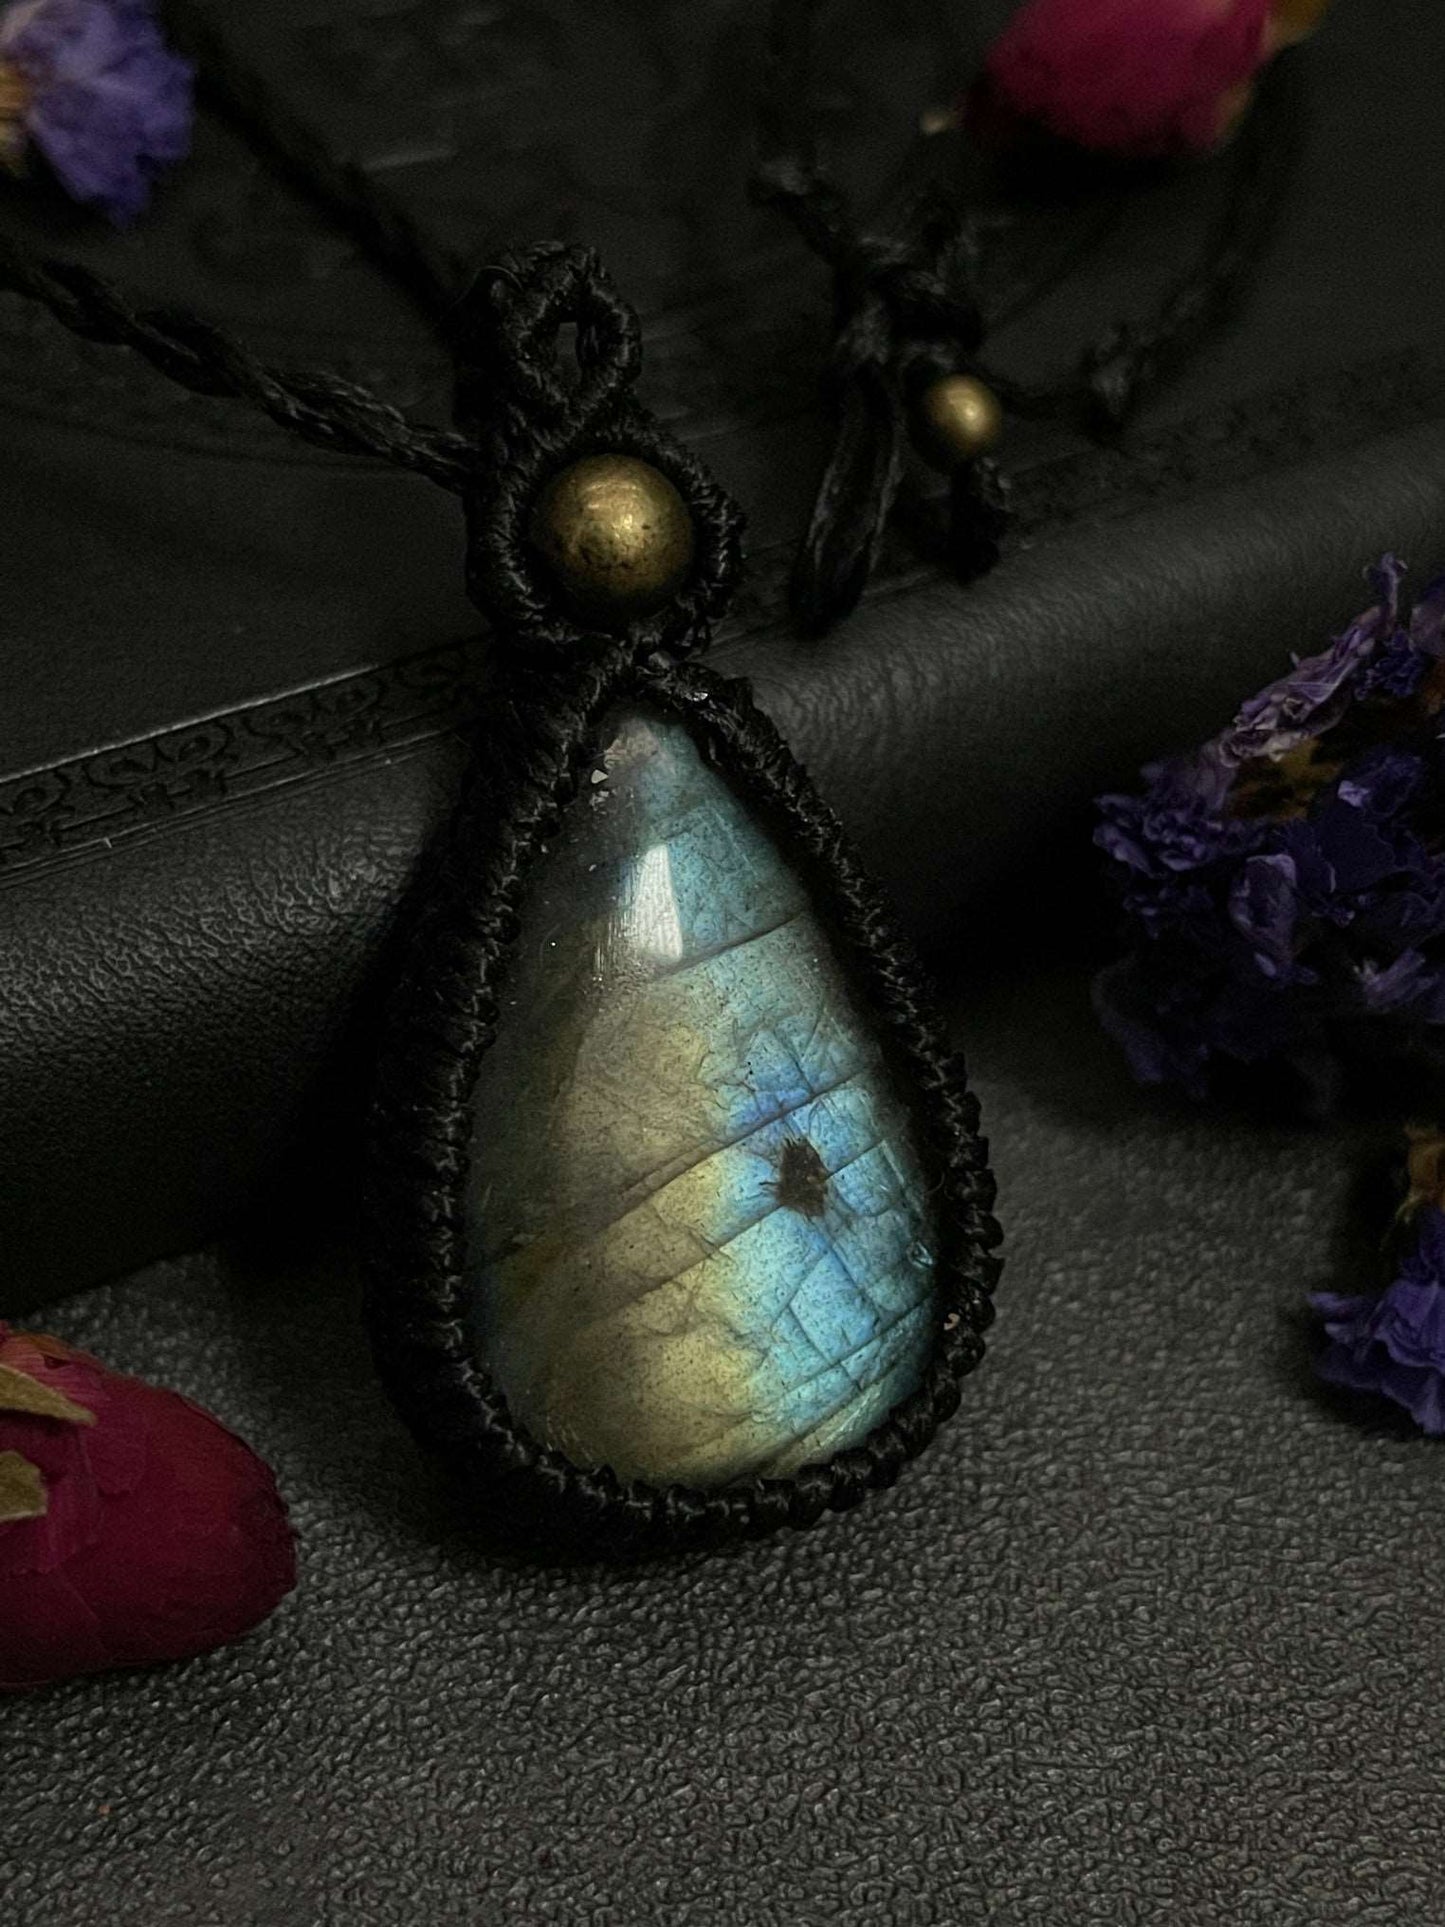 Pictured is a labradorite cabochon wrapped in macrame thread. A gothic book and flowers are nearby.